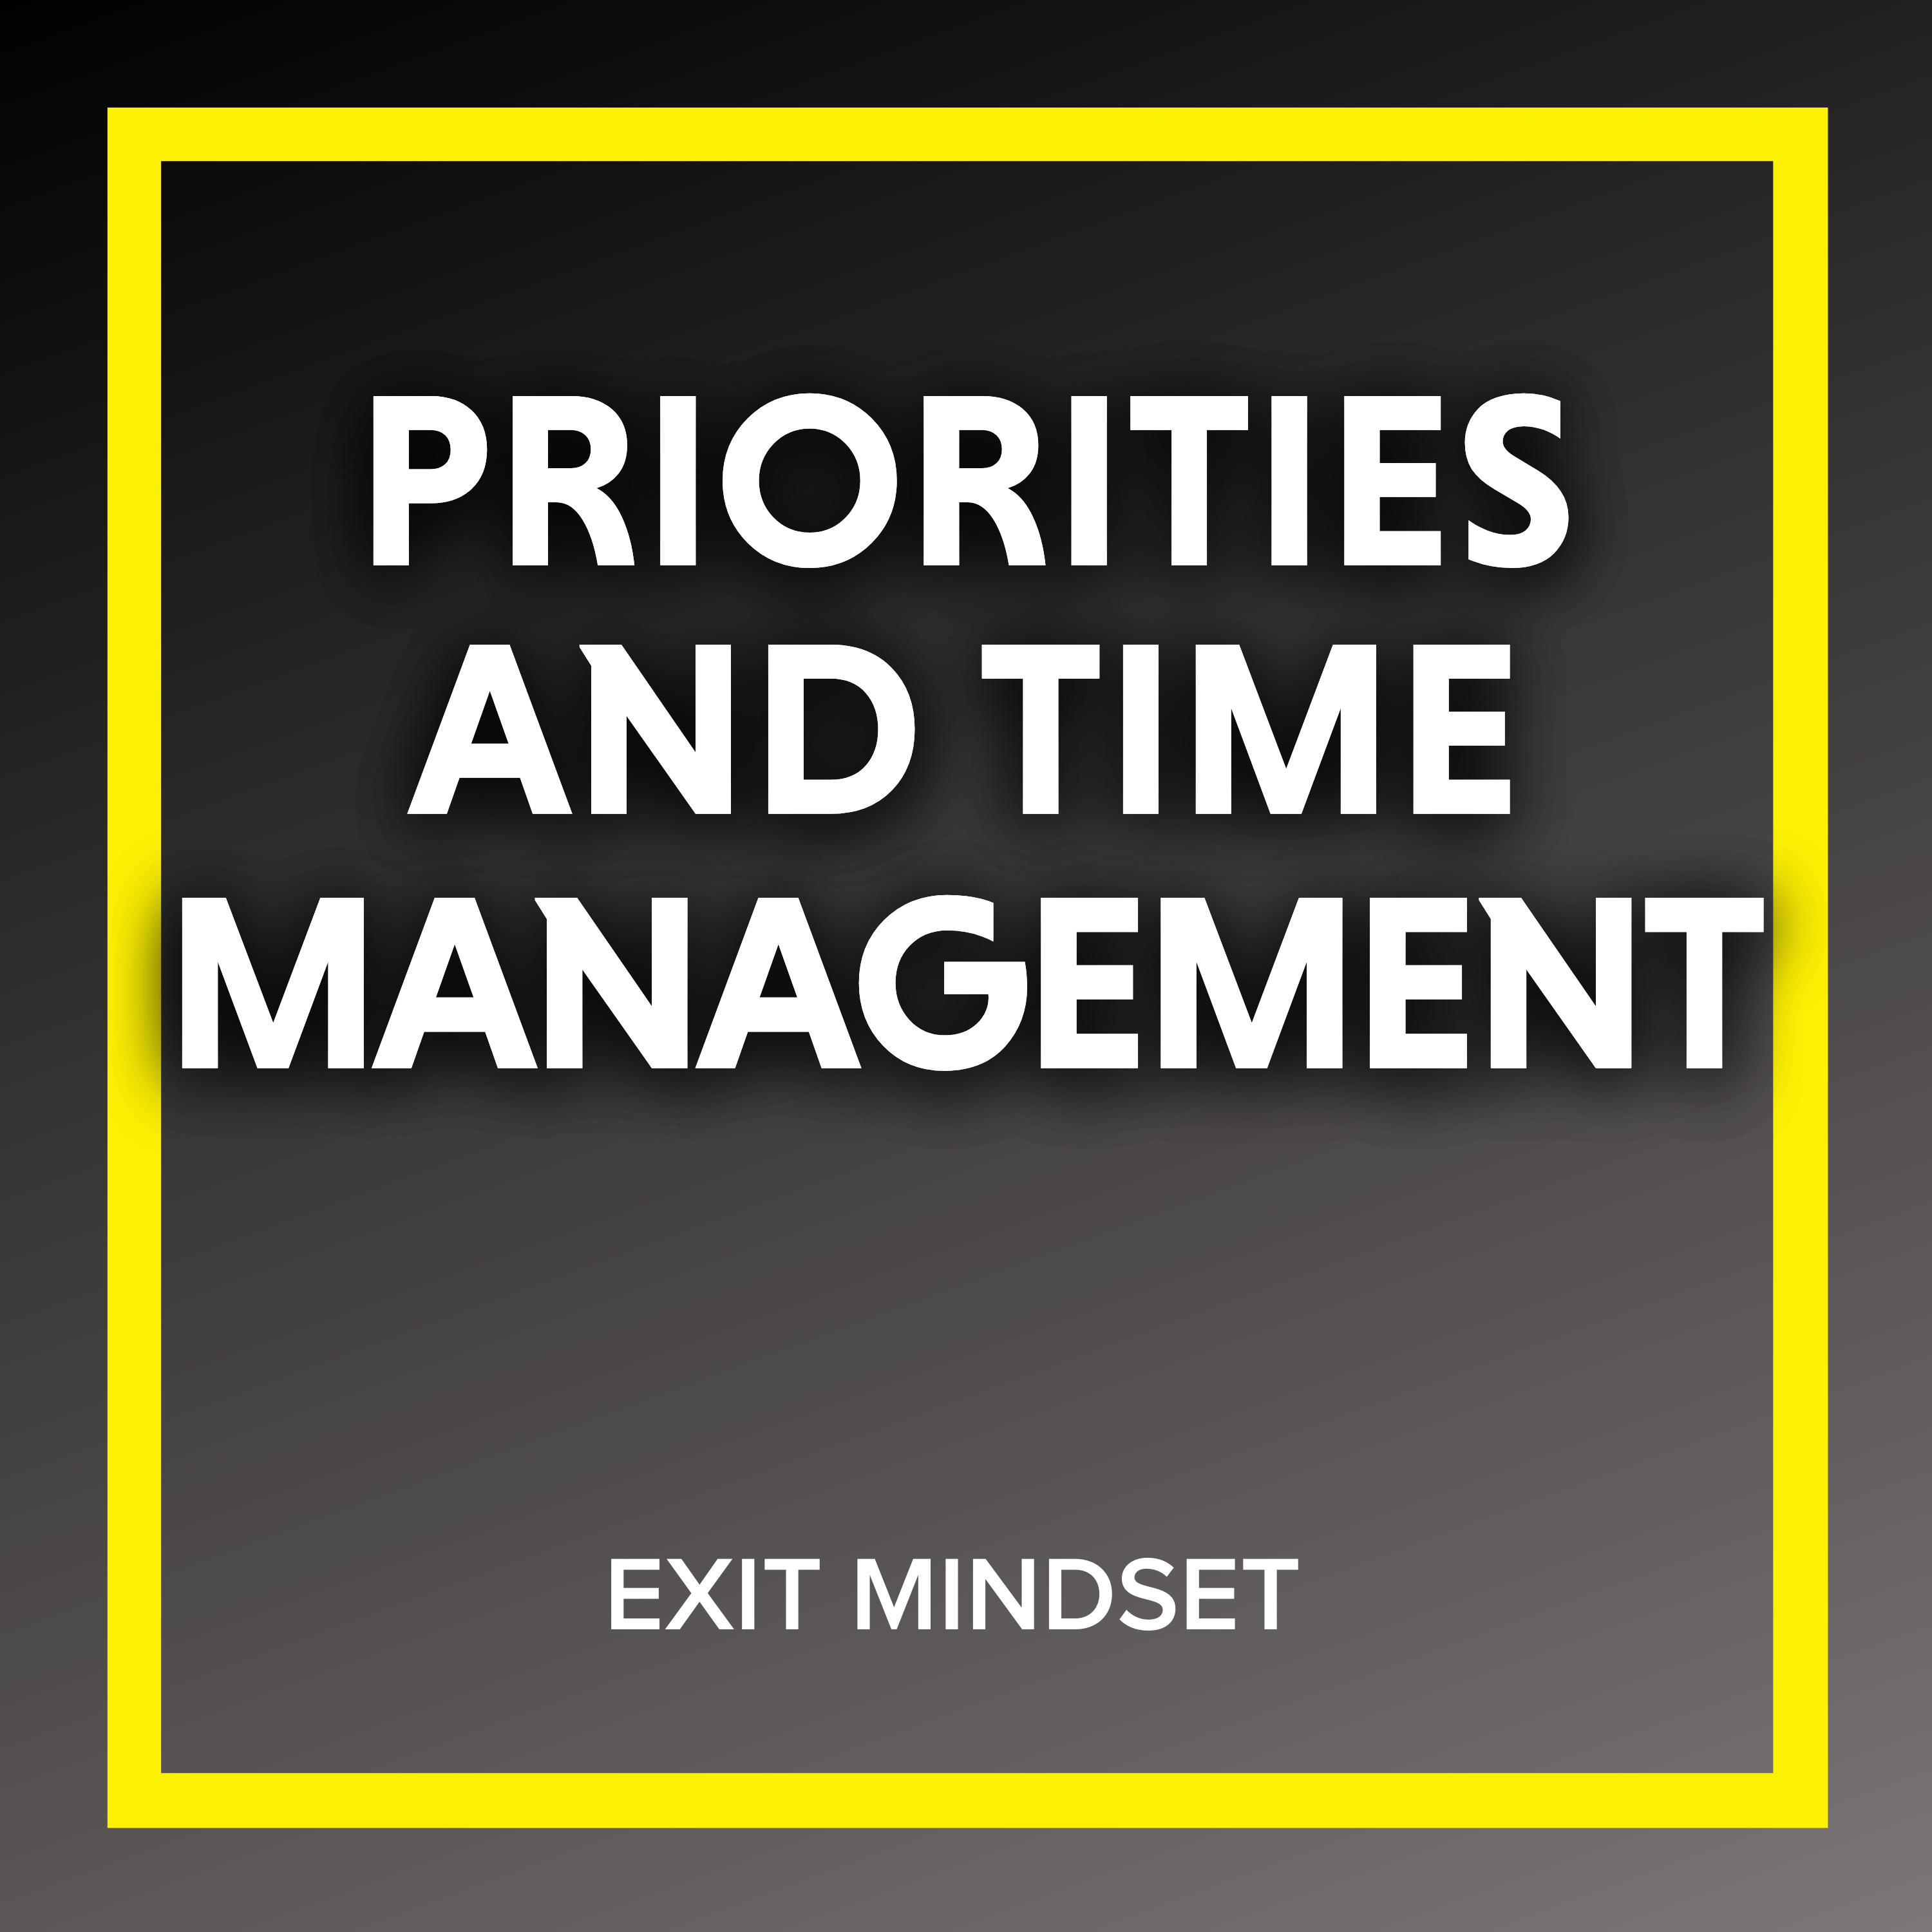 Priorities and Time Management